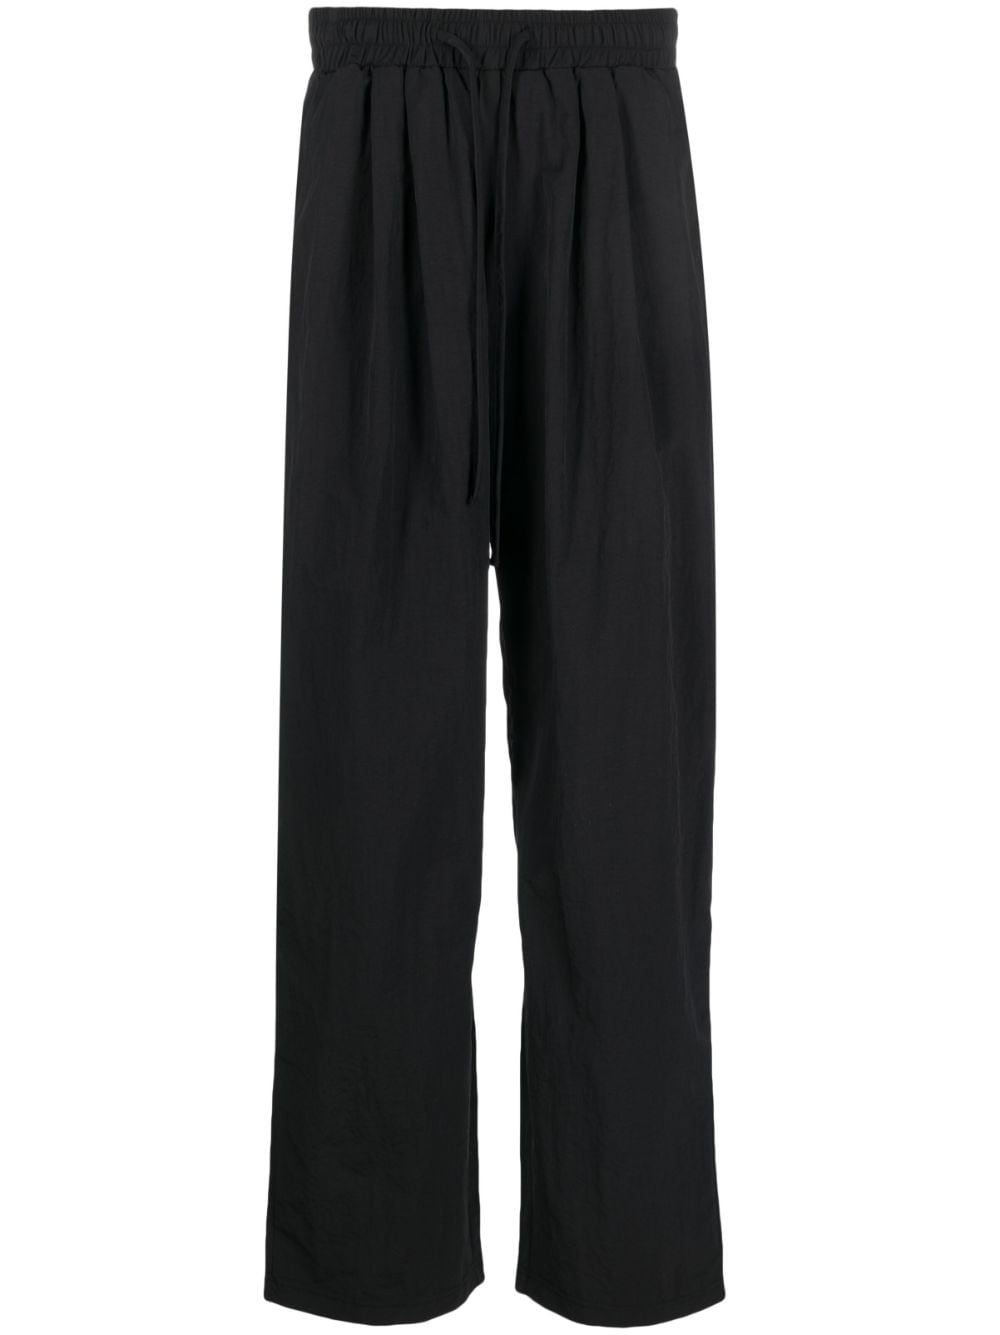 The Frankie Shop Kabo Elasticated Nylon-blend Trousers In Black